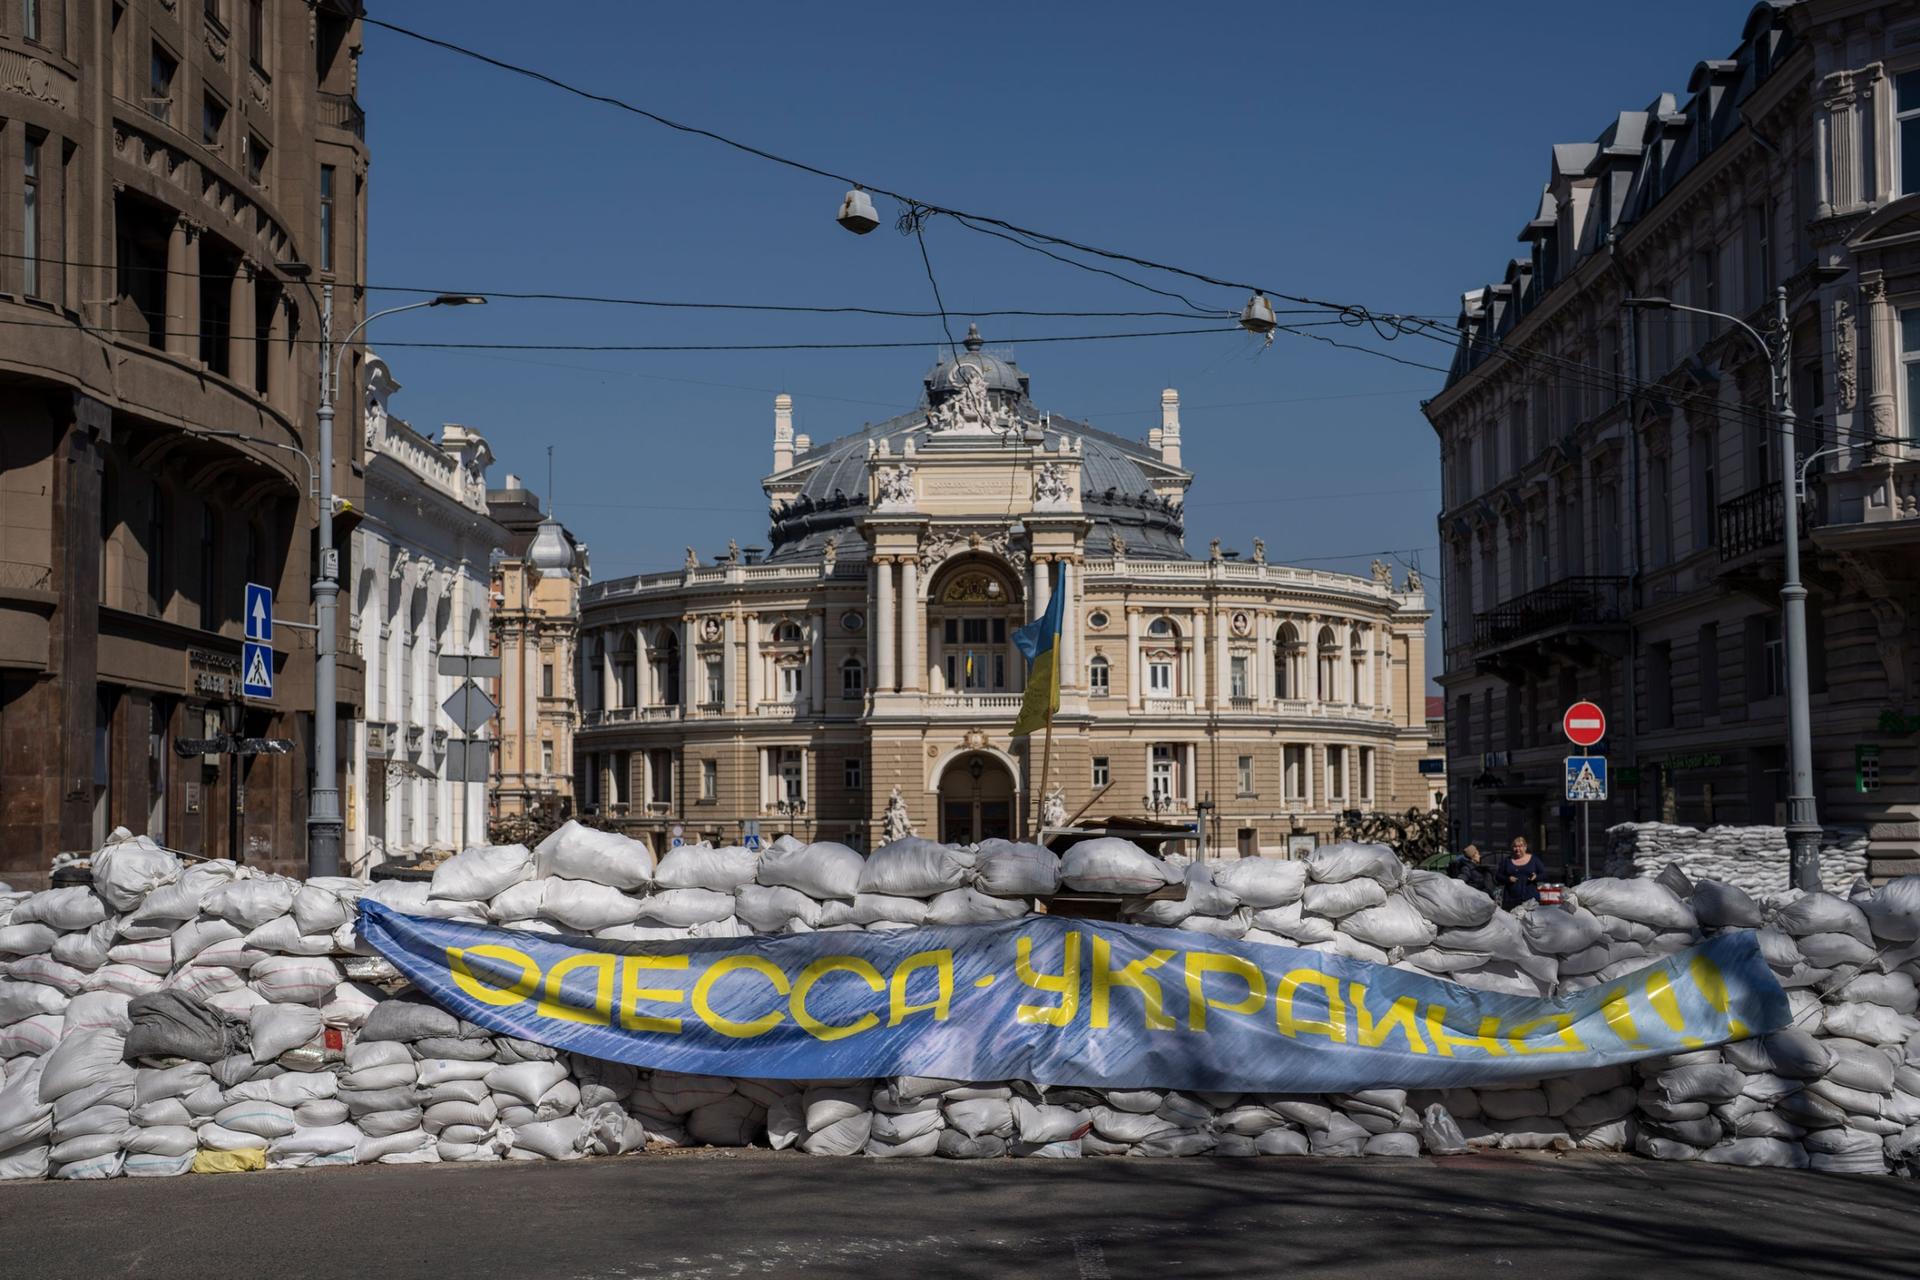 Sandbags block a street in front of the National Academic Theater of Opera and Ballet building as a preparation for a possible Russian offensive, in Odesa, Ukraine, Thursday, March 24, 2022. 